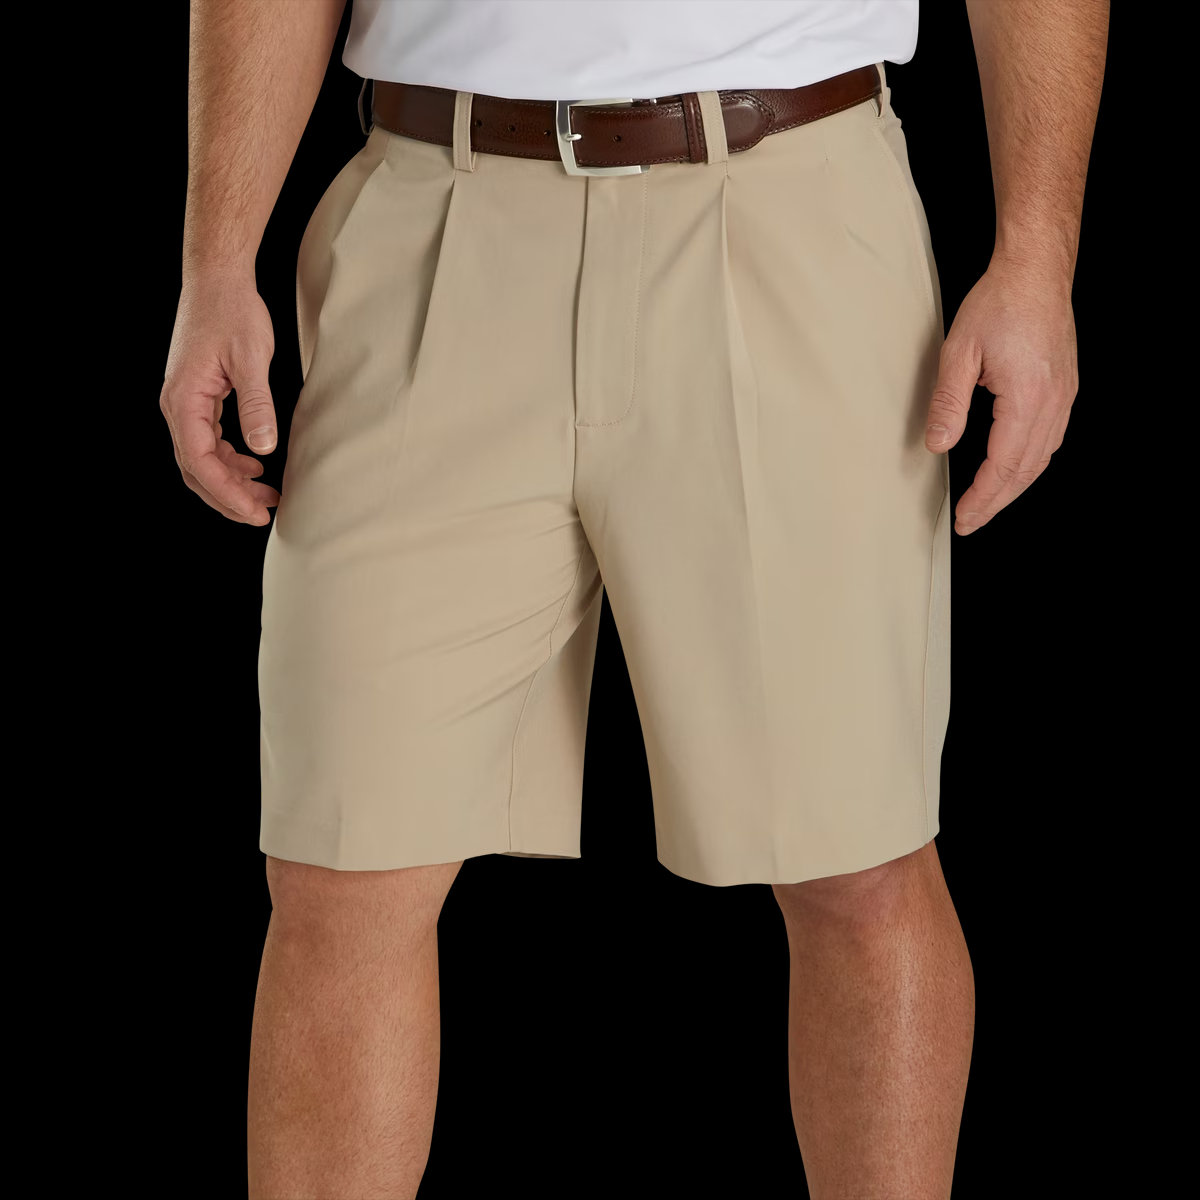 Pleated shorts mens have been a popular choice in the realm of fashion due to their unique design elements and